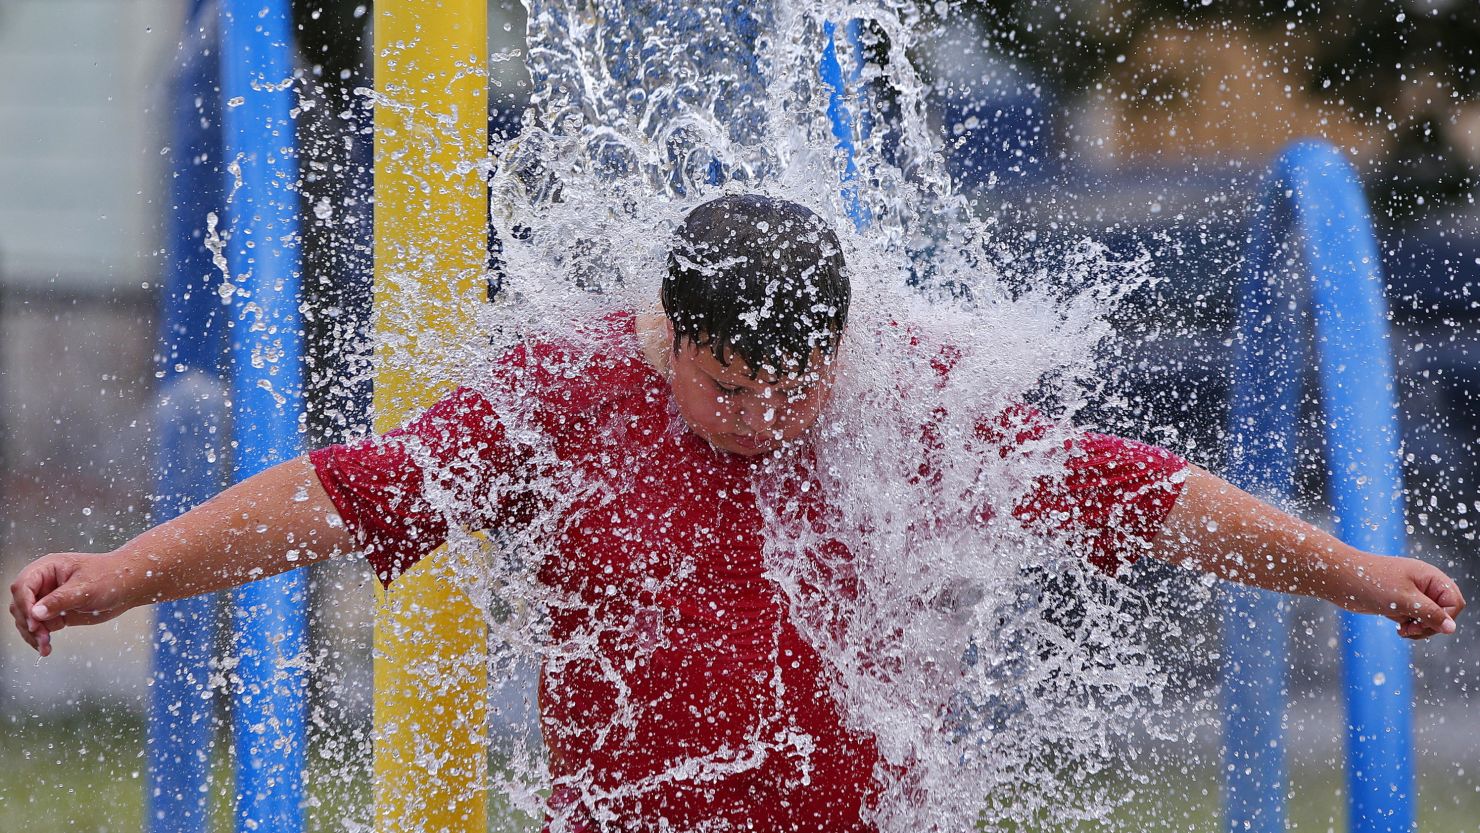 Graiden Therrien, 11, takes shelter from the sweltering heat by waiting for the automated water bucket to overturn onto his head at Harrington Park in New Bedford, Mass. on Monday, July 31, 2023. (Peter Pereira/The Standard-Times via AP)